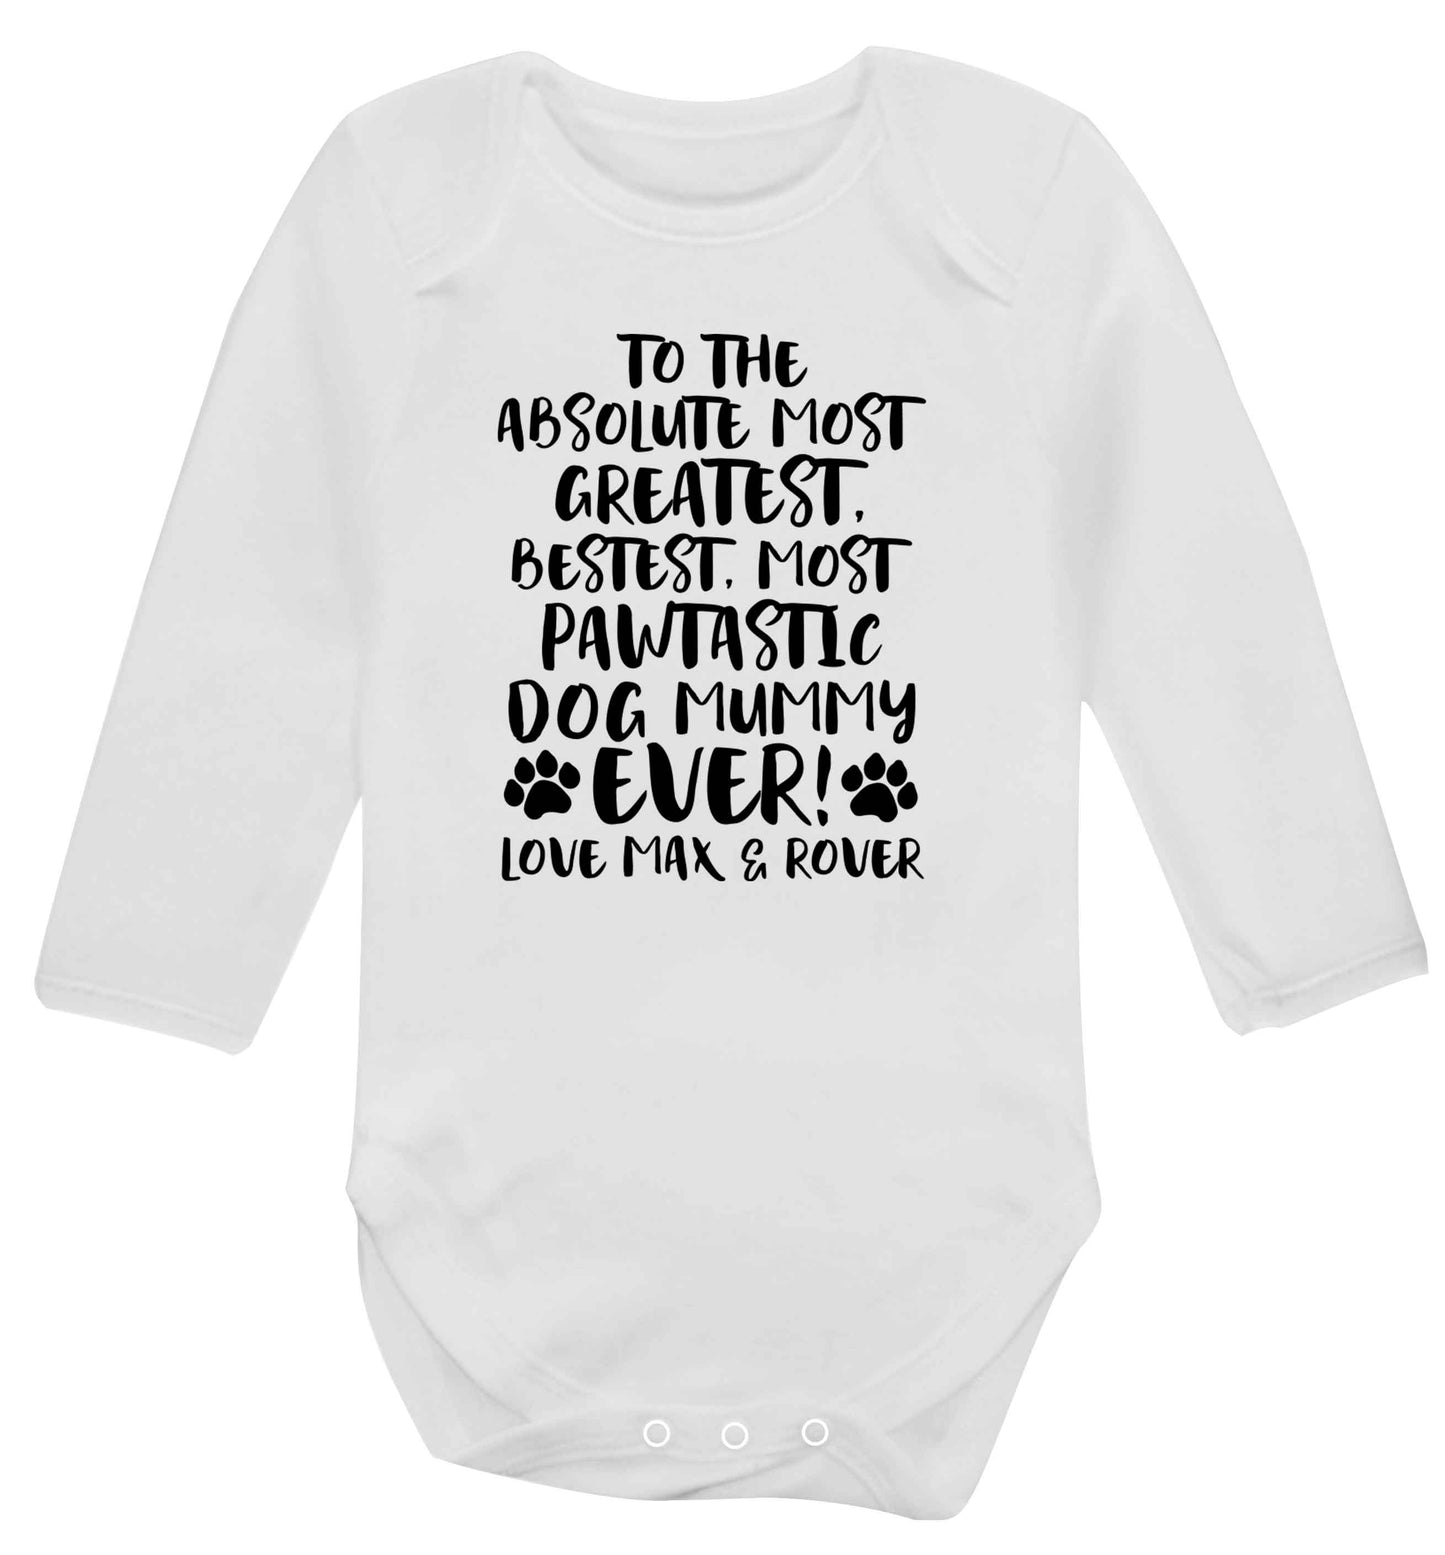 Personalsied to the most pawtastic dog mummy ever Baby Vest long sleeved white 6-12 months